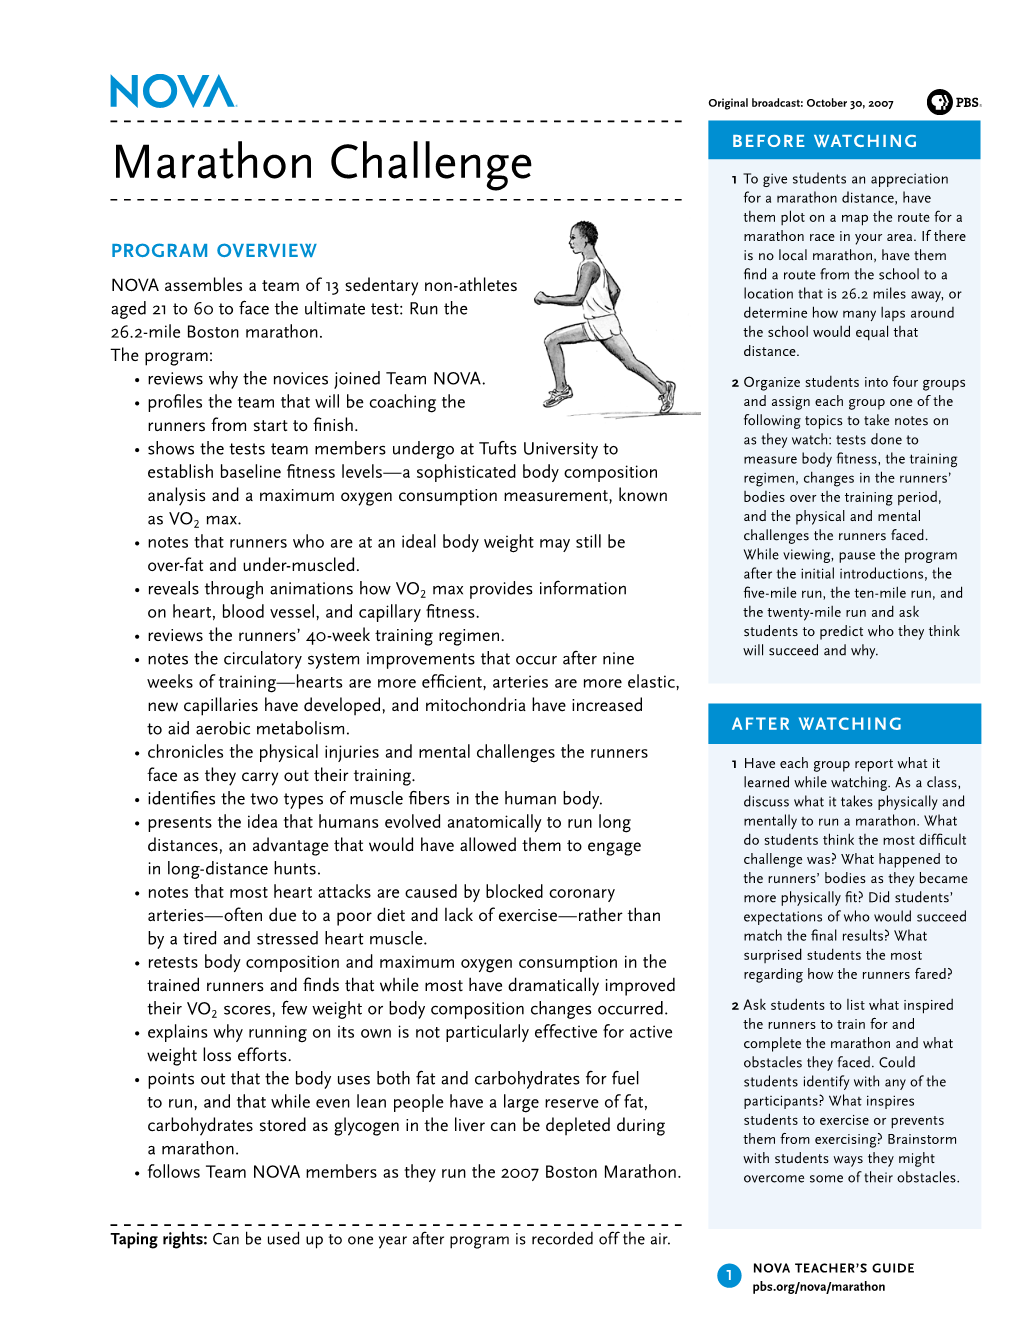 Marathon Challenge 1 to Give Students an Appreciation for a Marathon Distance, Have Them Plot on a Map the Route for a Marathon Race in Your Area